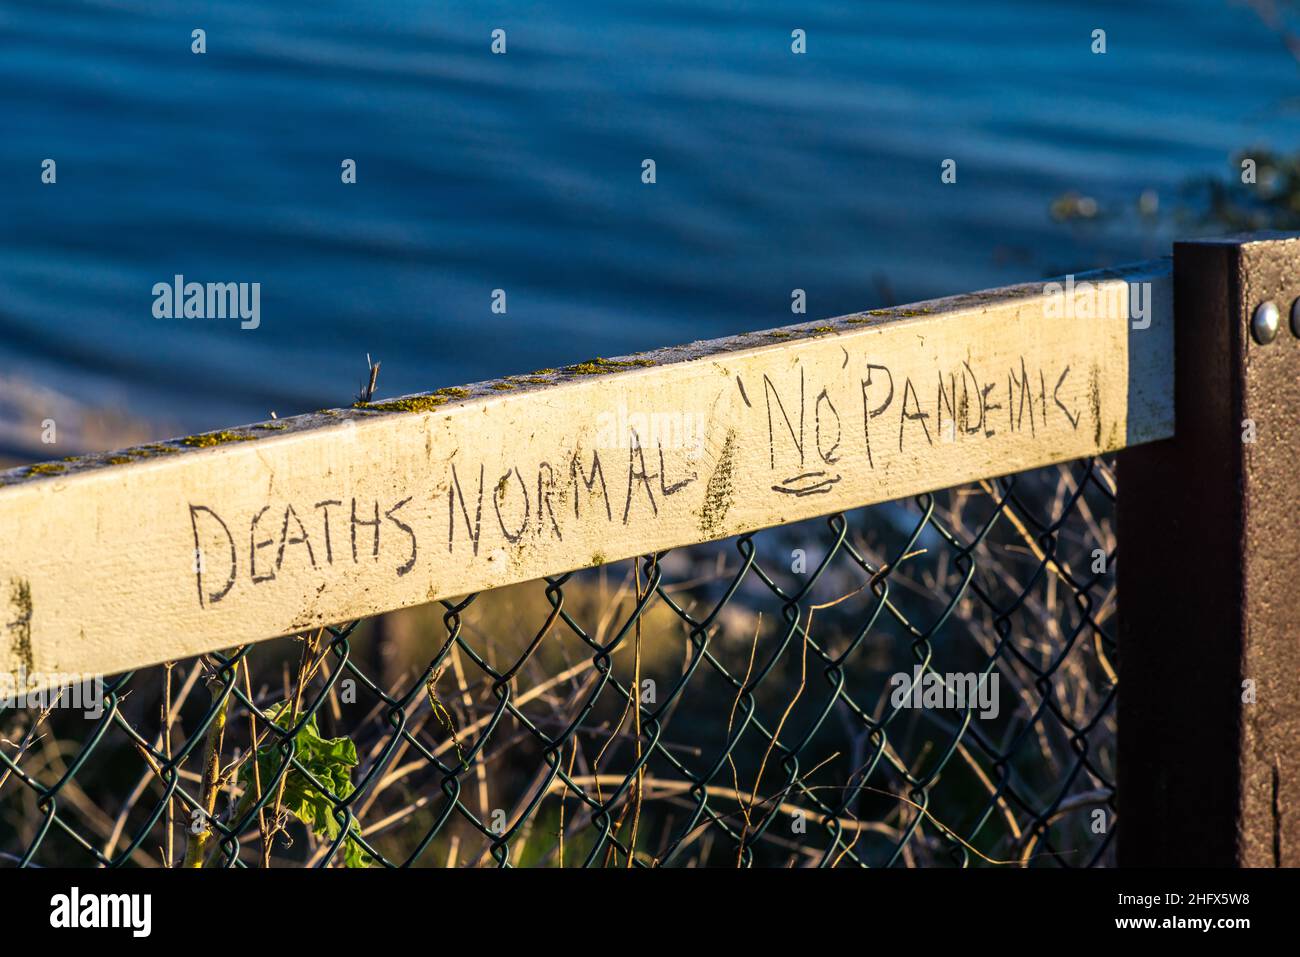 'Deaths normal' and 'No Pandemic' graffiti on a fence in Boscombe, conspiracy theory concept, Bournemouth, Dorset, England, UK Stock Photo